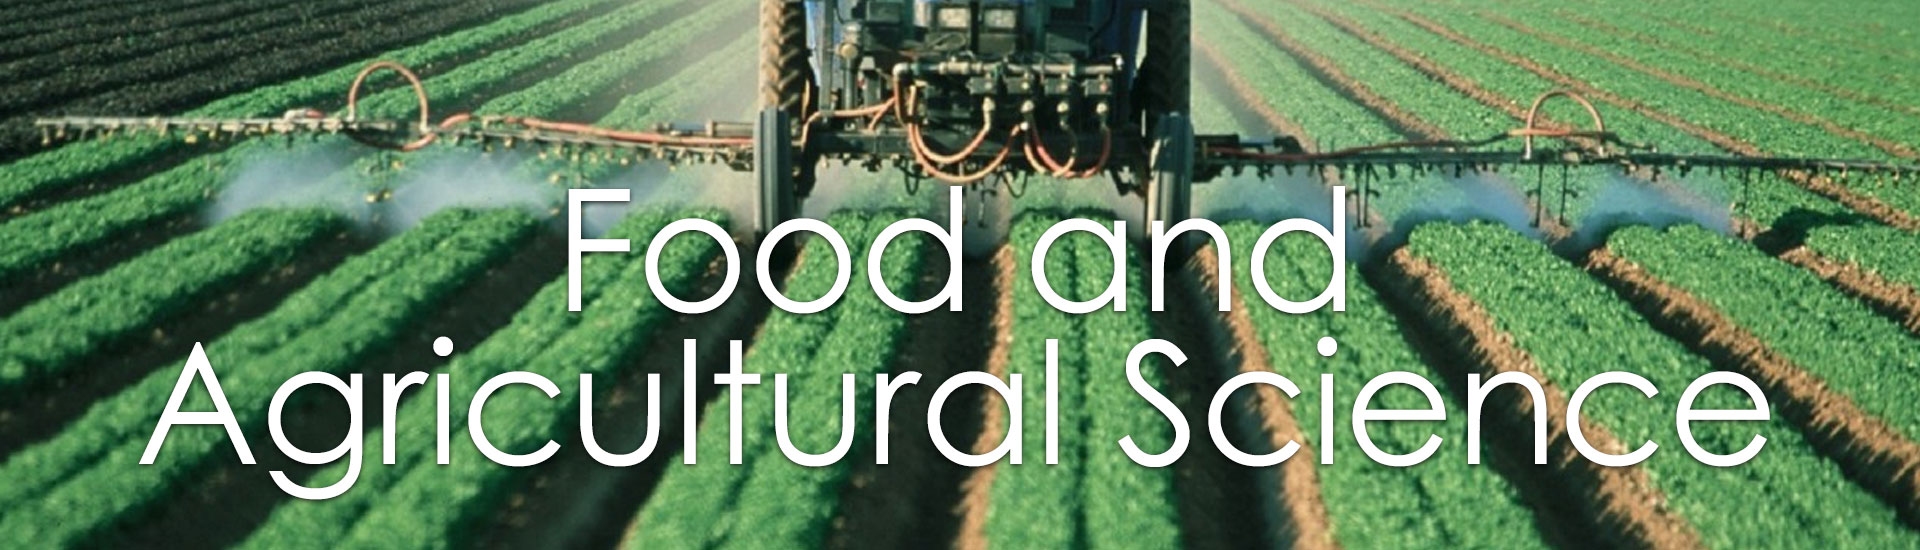 Food and Agricultural Science